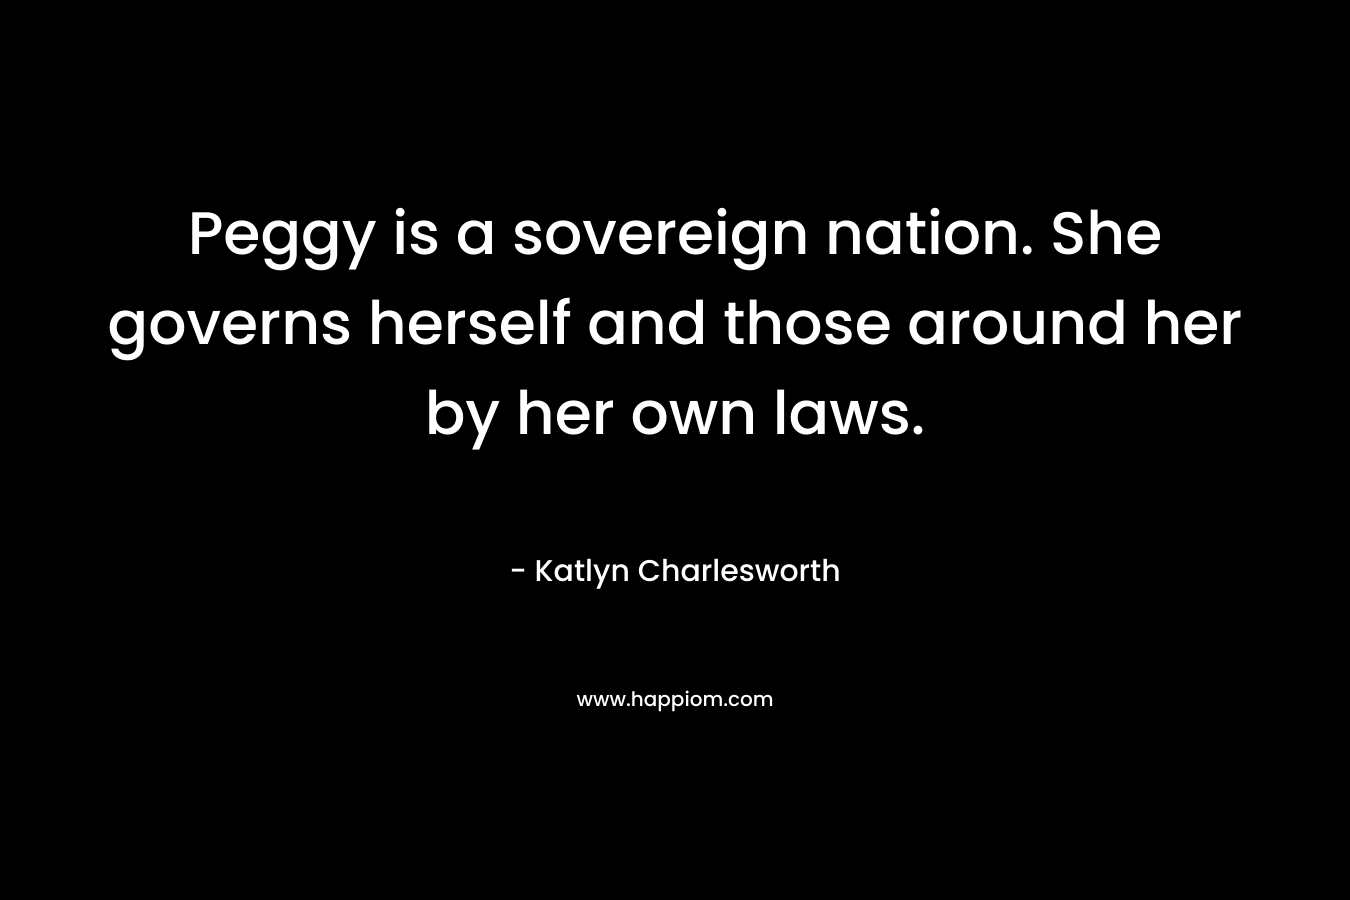 Peggy is a sovereign nation. She governs herself and those around her by her own laws. – Katlyn Charlesworth